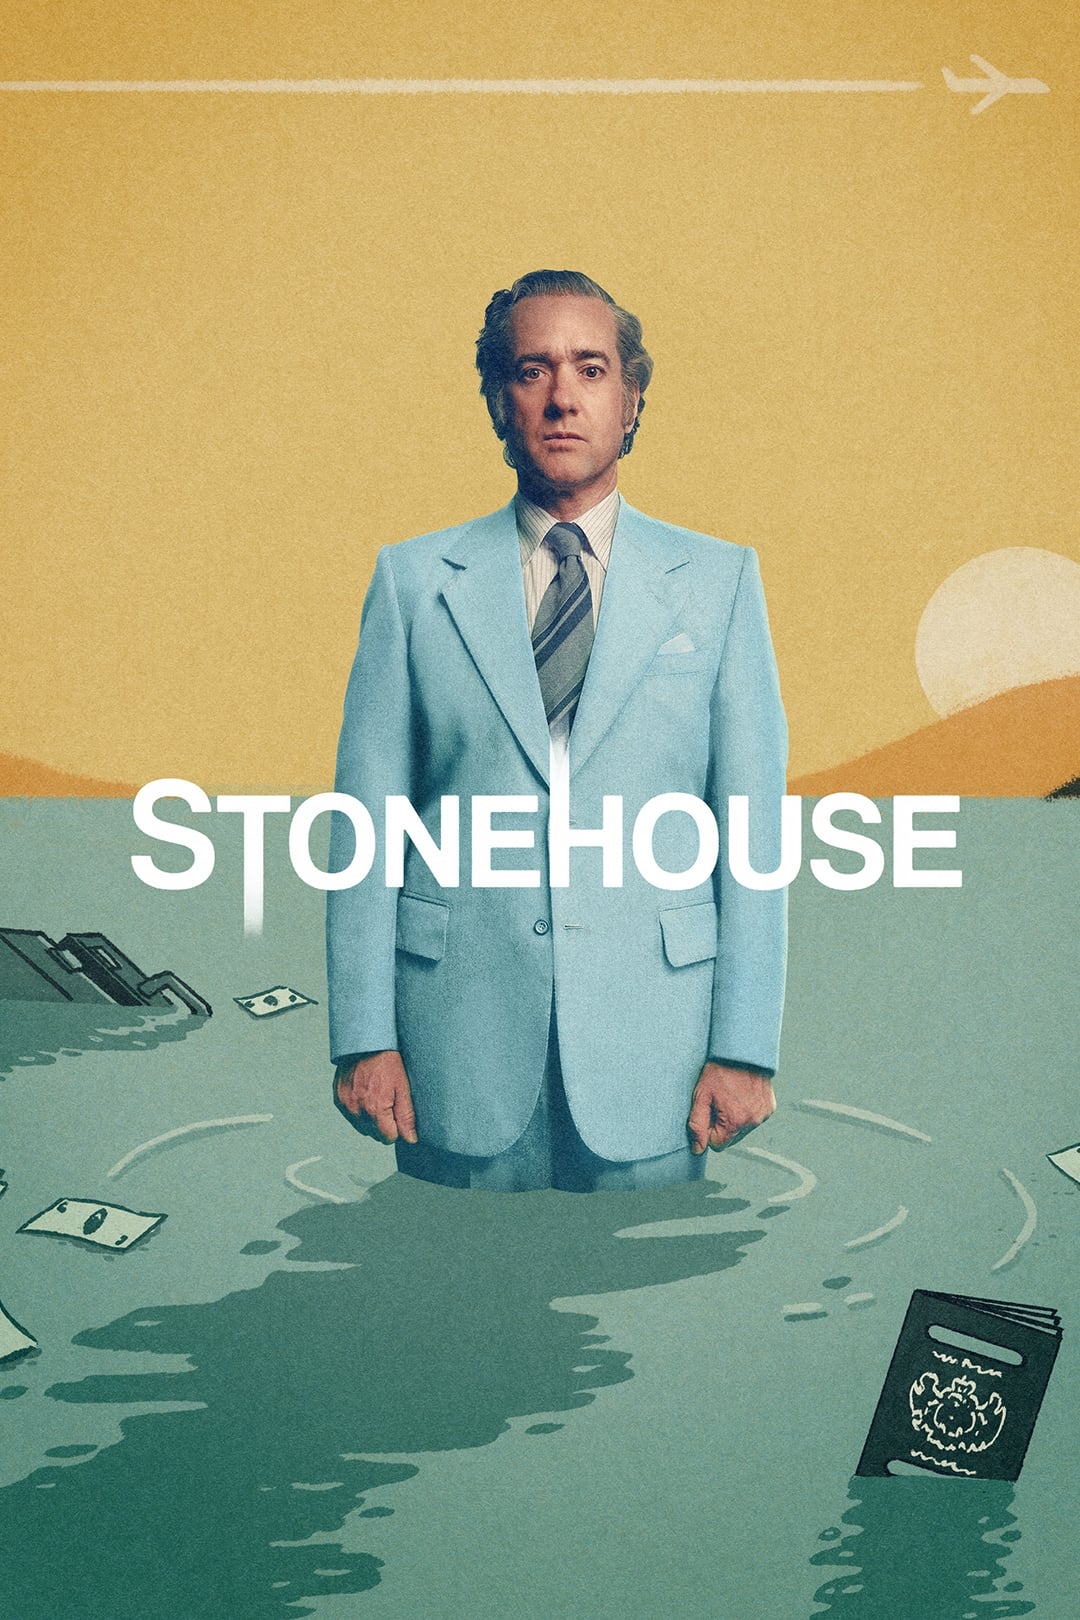 Stonehouse TV Shows About Biography